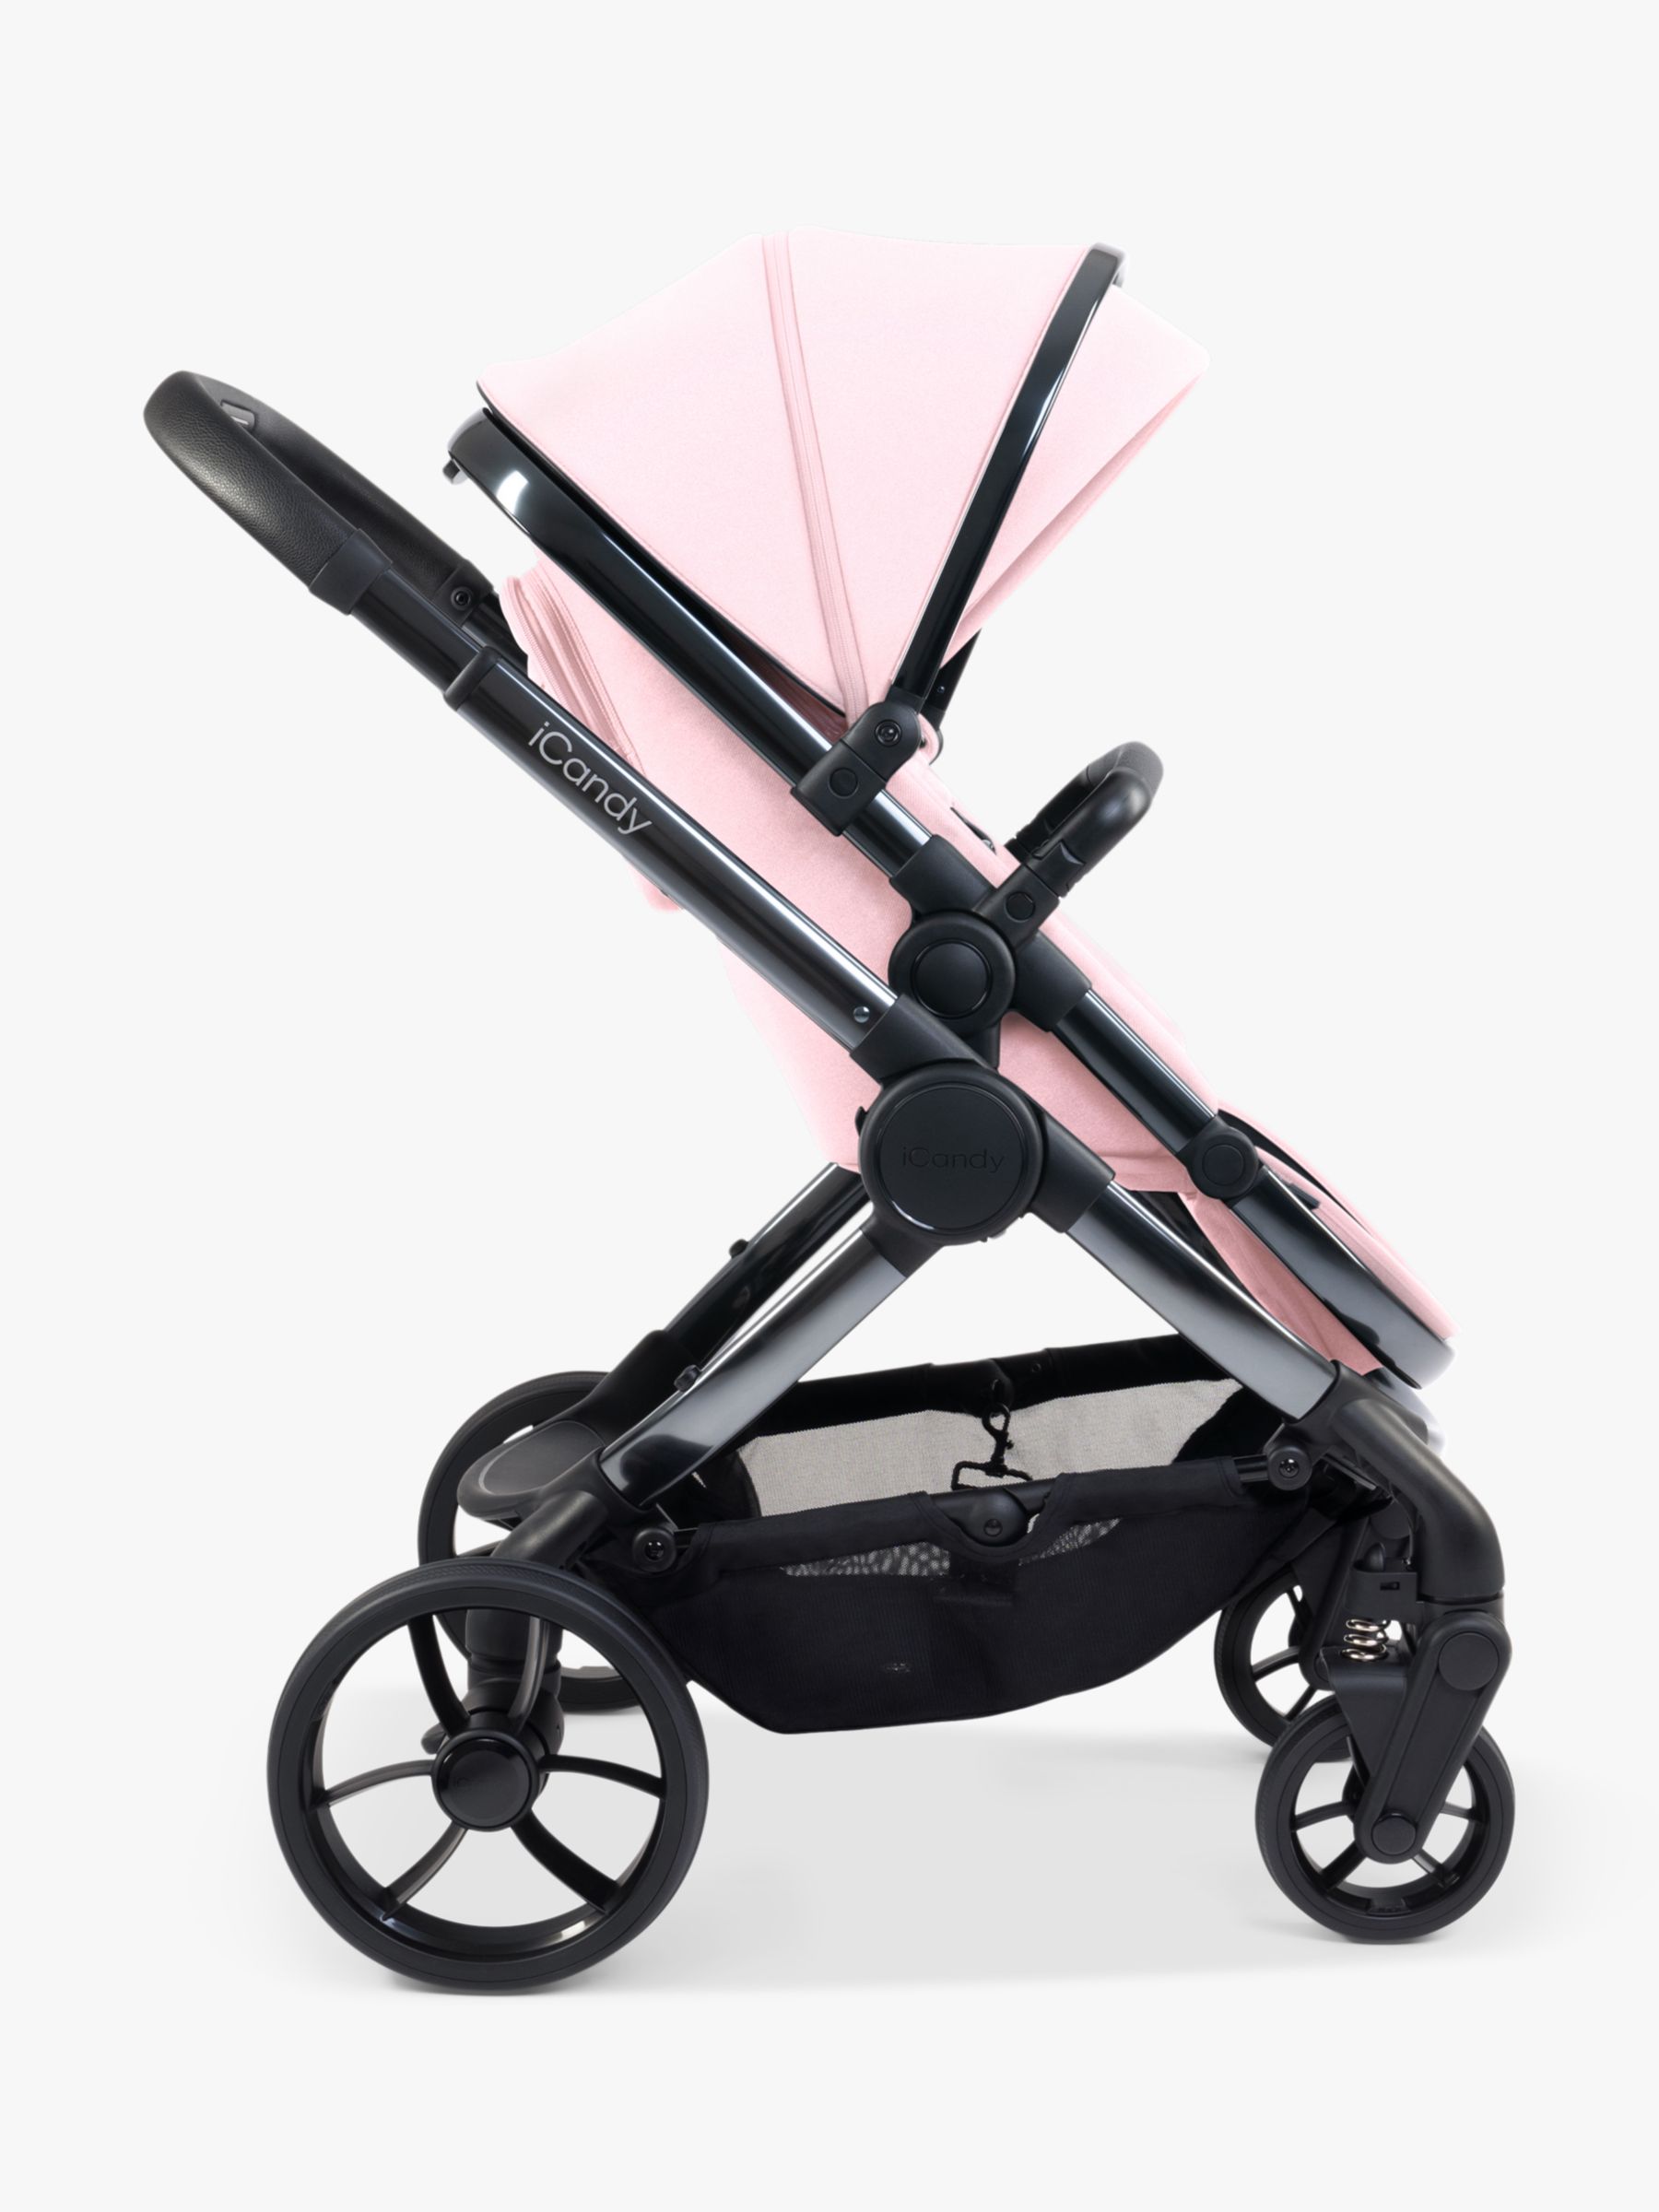 iCandy Peach 7 Pushchair & Accessories with Maxi-Cosi Pebble 360 Pro Baby Car Seat and Base Bundle, Blush Pink/Essential Black